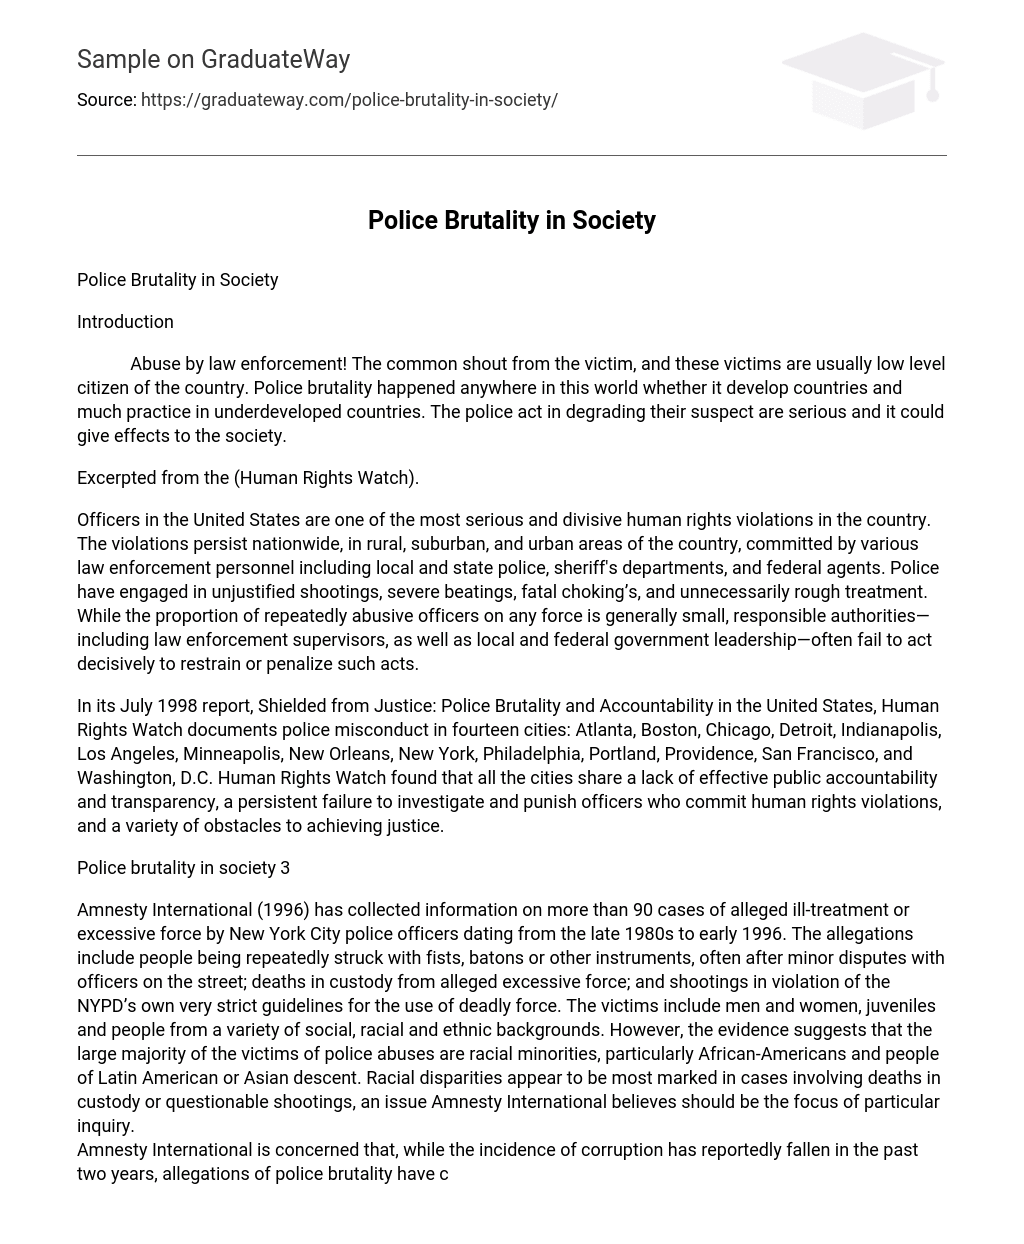 research essay on police brutality